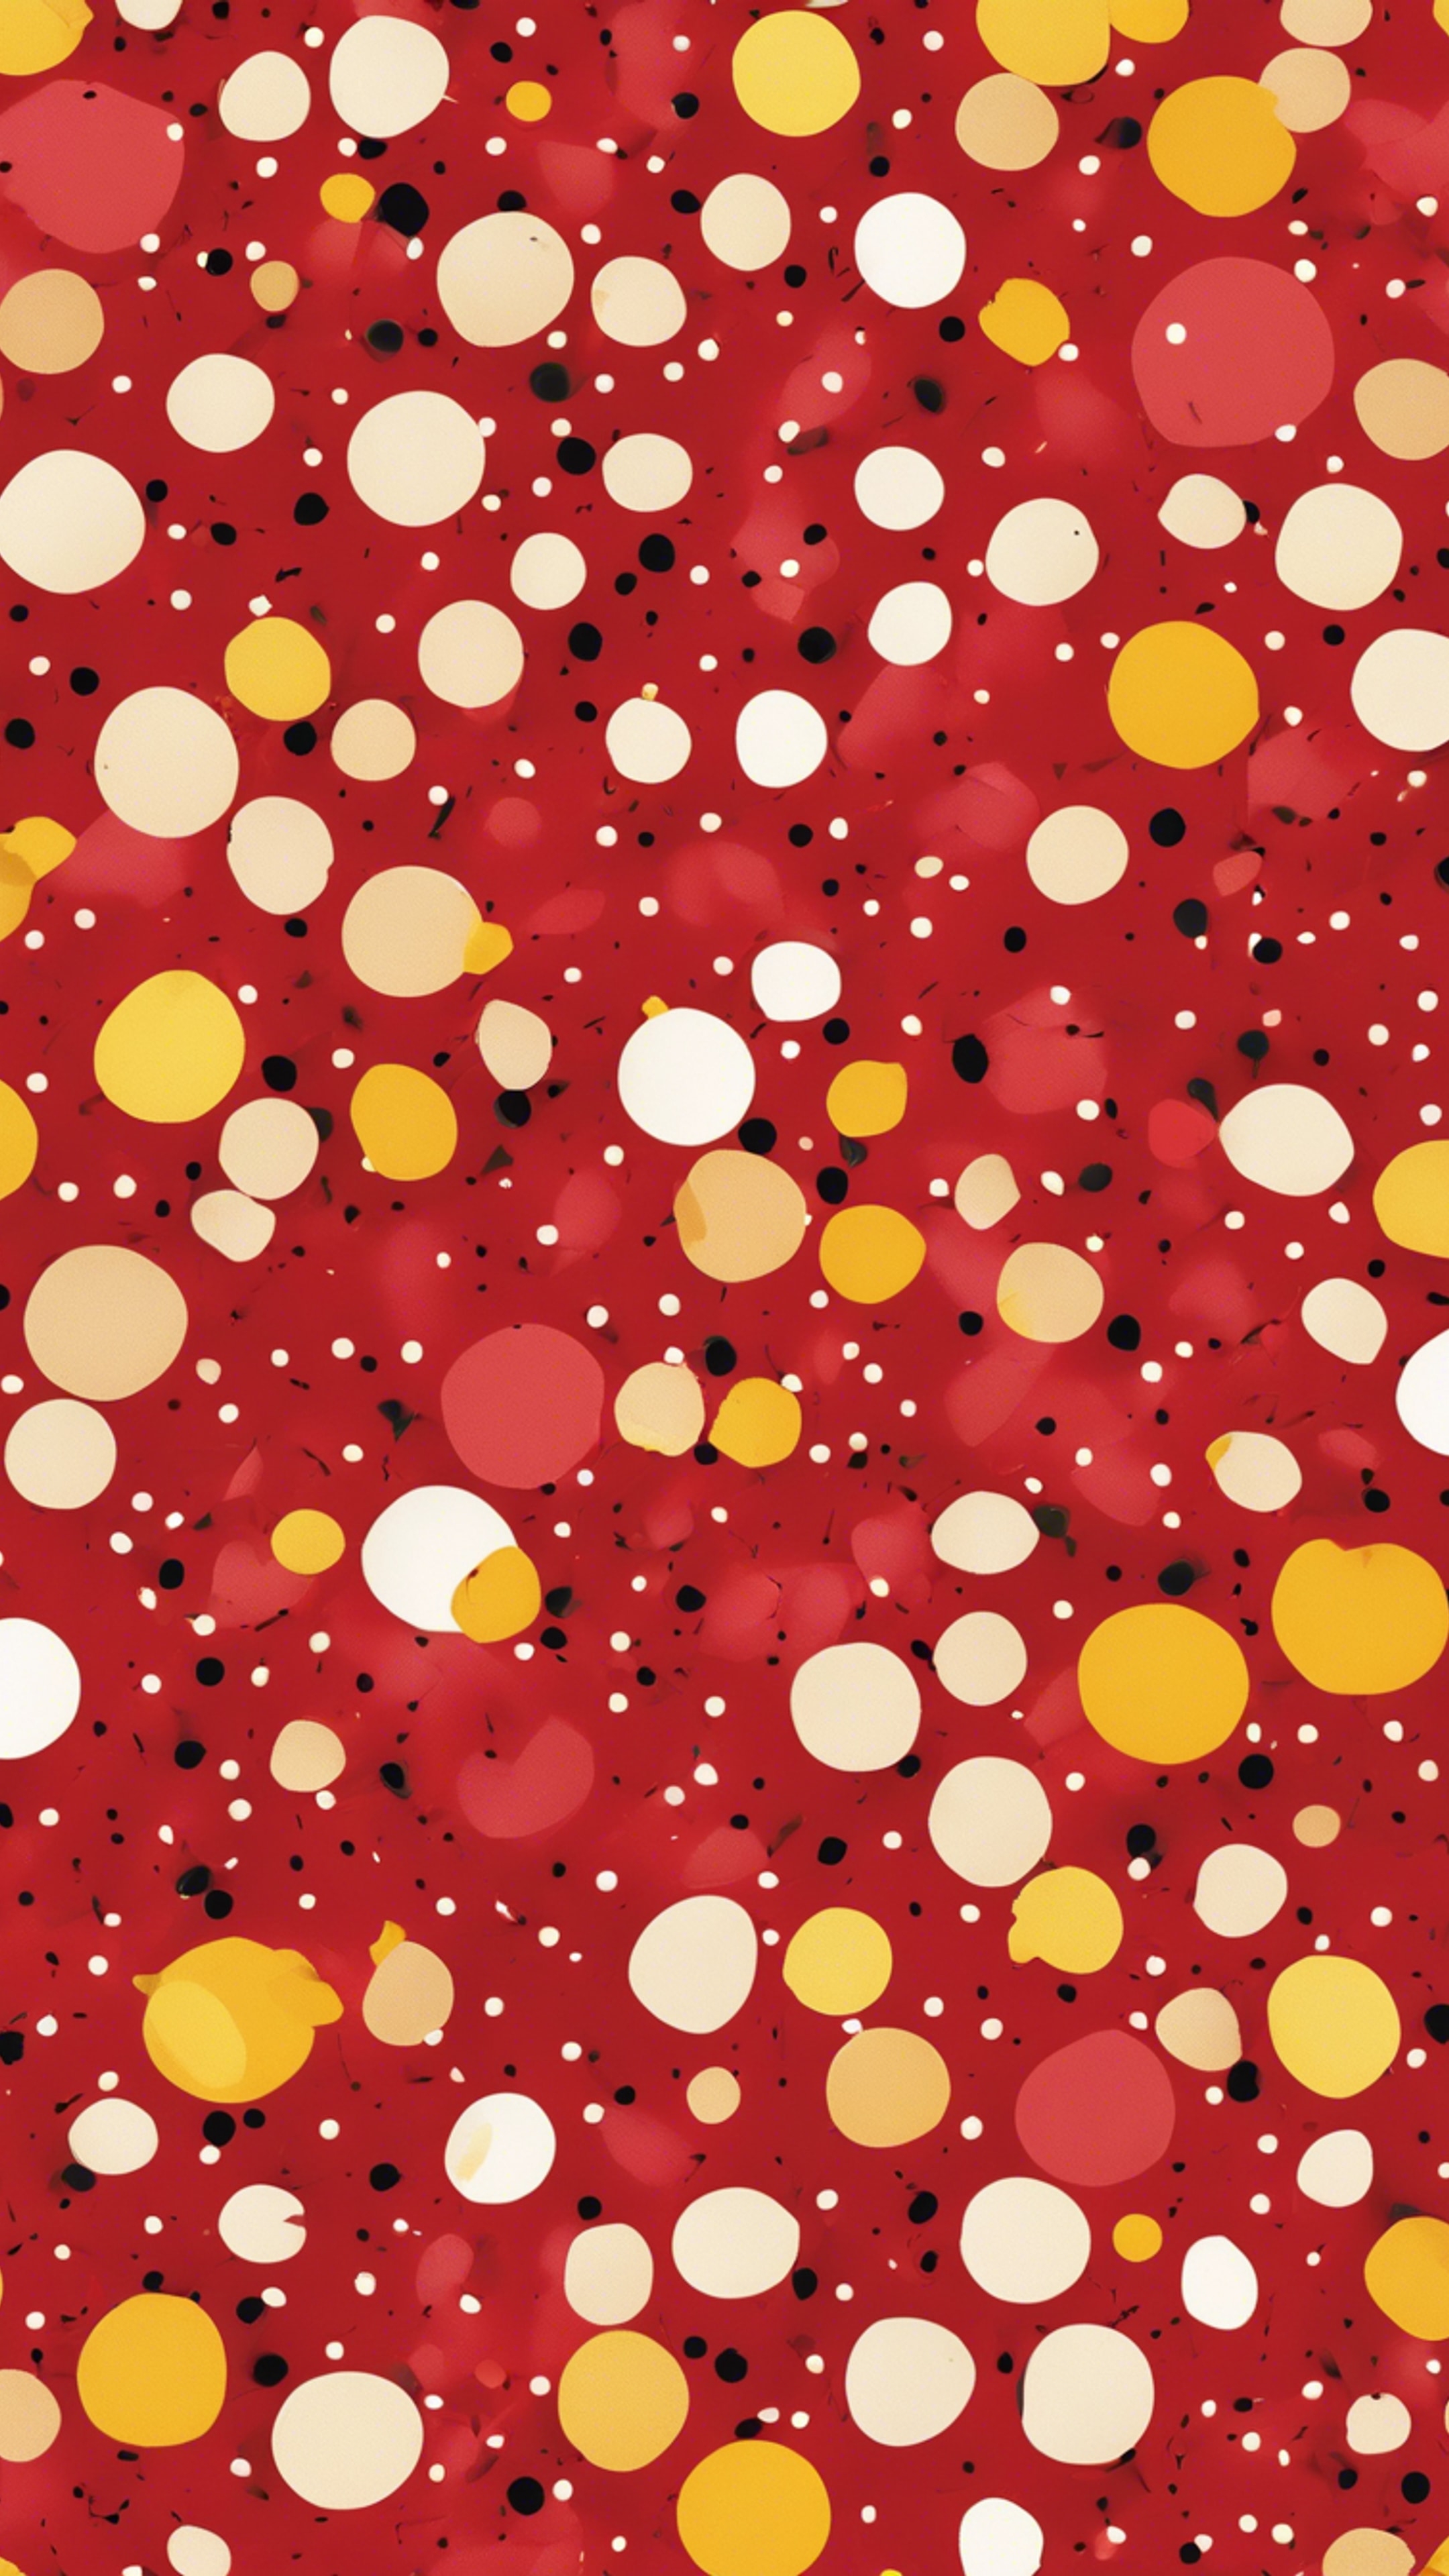 A seamless pattern of vibrant red and vivid yellow, polka dots scattered randomly. Wallpaper[206bafc01adc43569588]